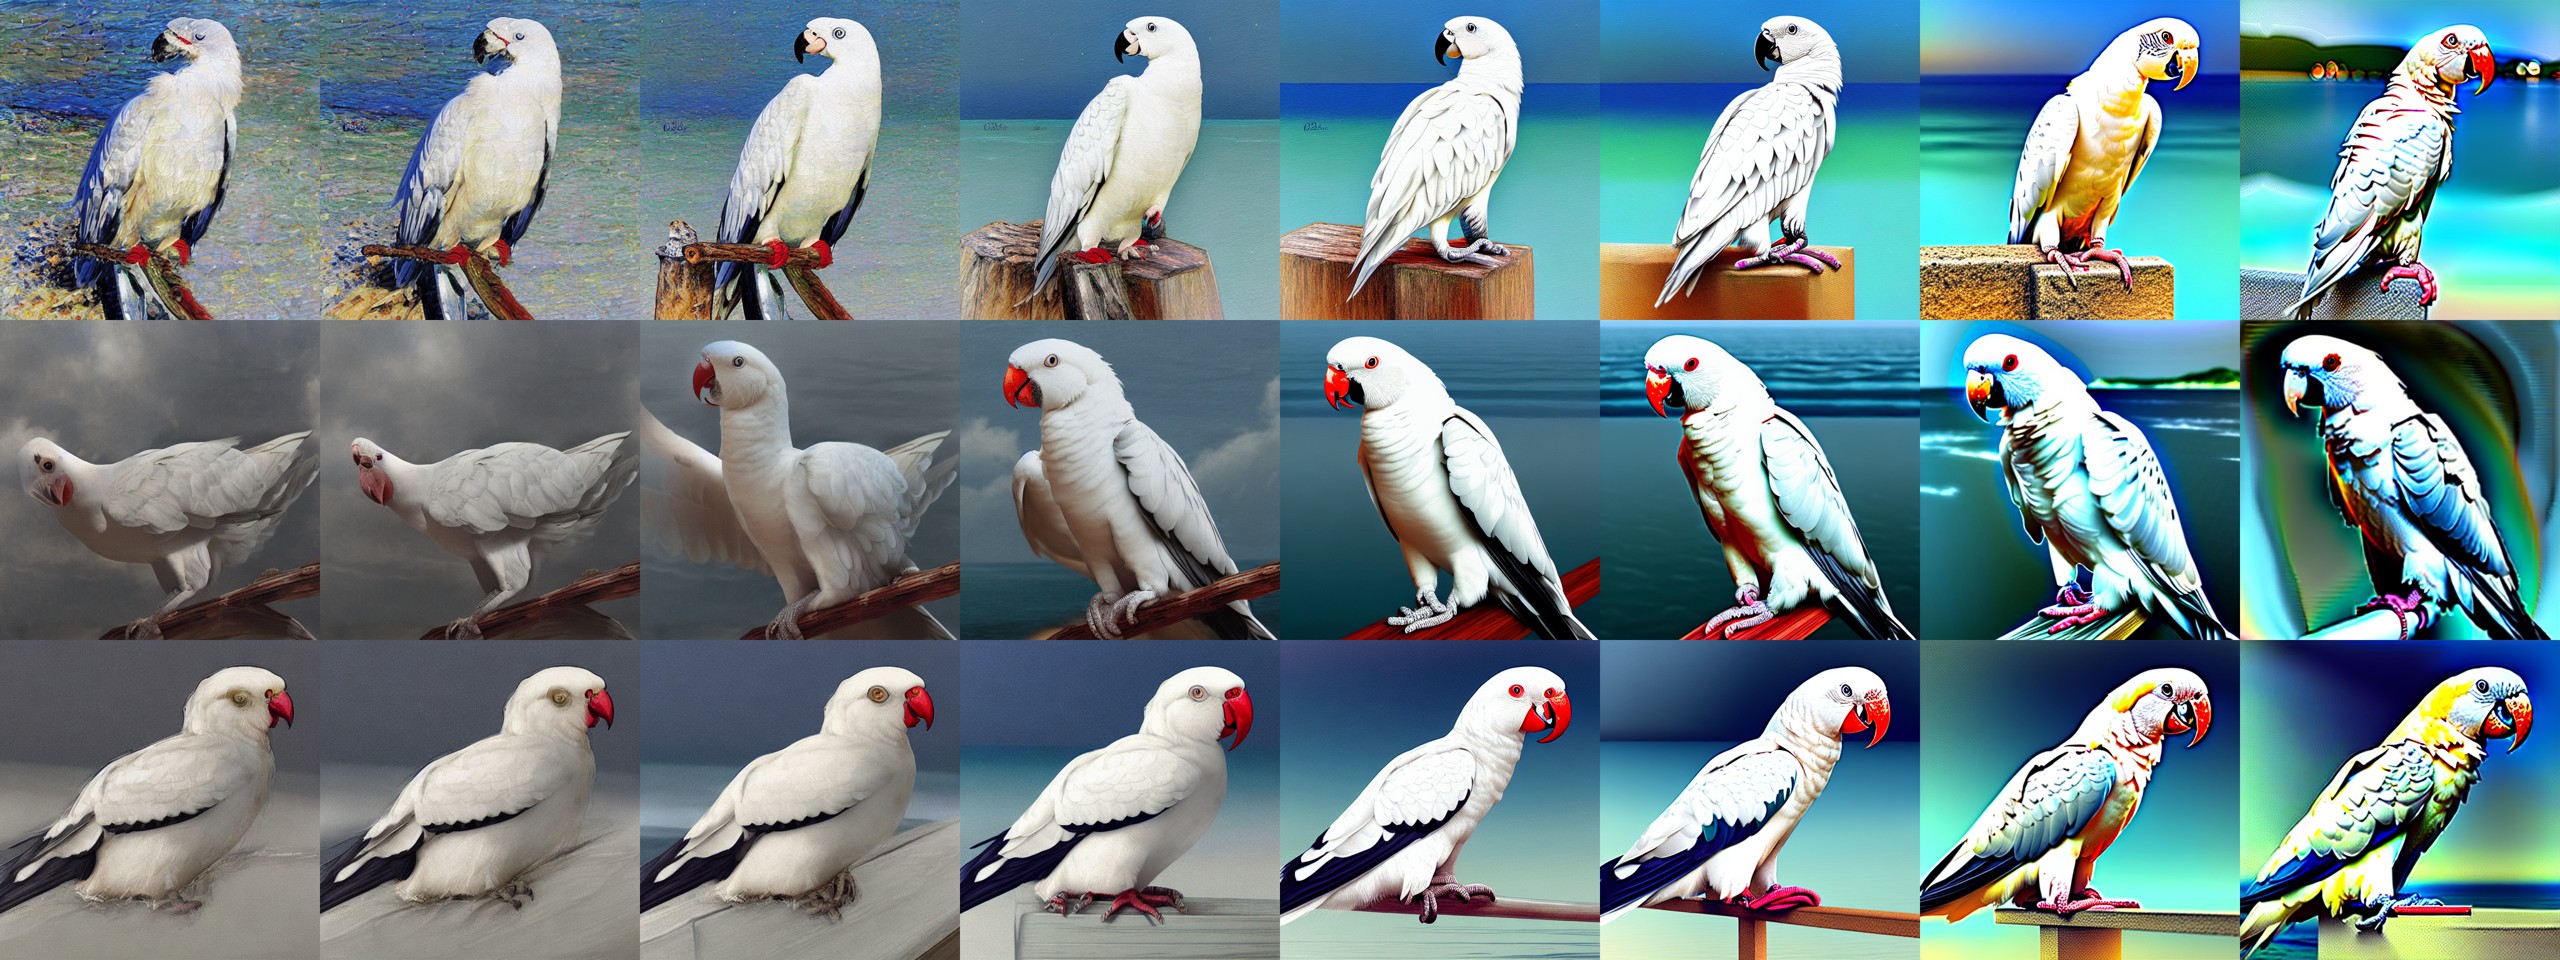 scales_a_white_parrot_sitting_by_the_se_seagull_1